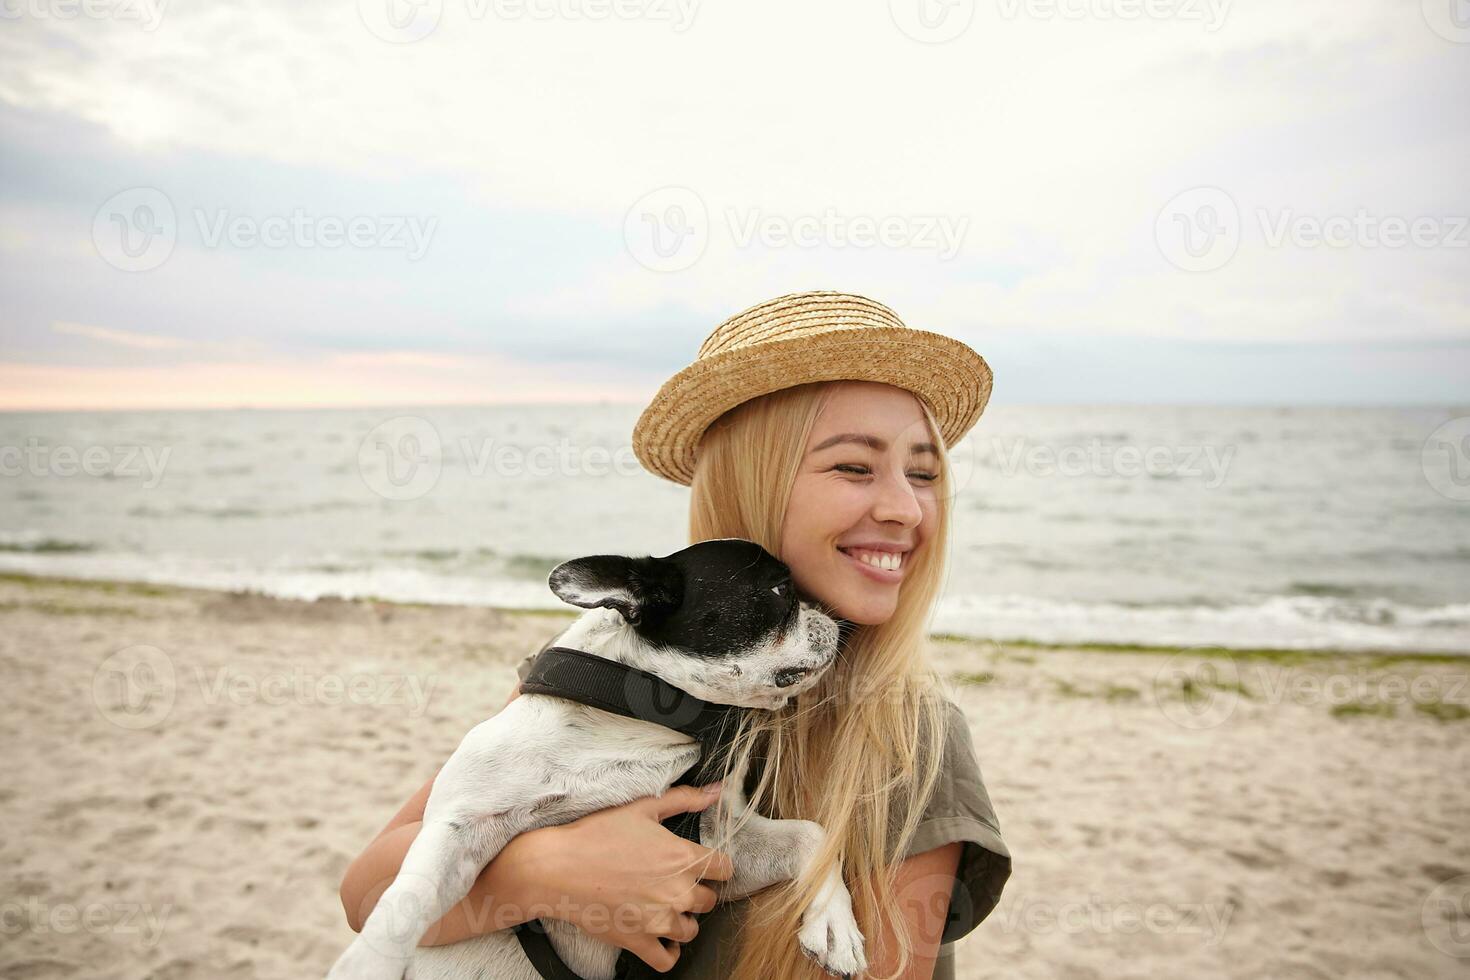 Outdoor photo of young pretty blonde with casual hairstyle standing over seaside and carrying her small dog on hands, smiling happily with closed eyes, wearing summer dress and boater hat